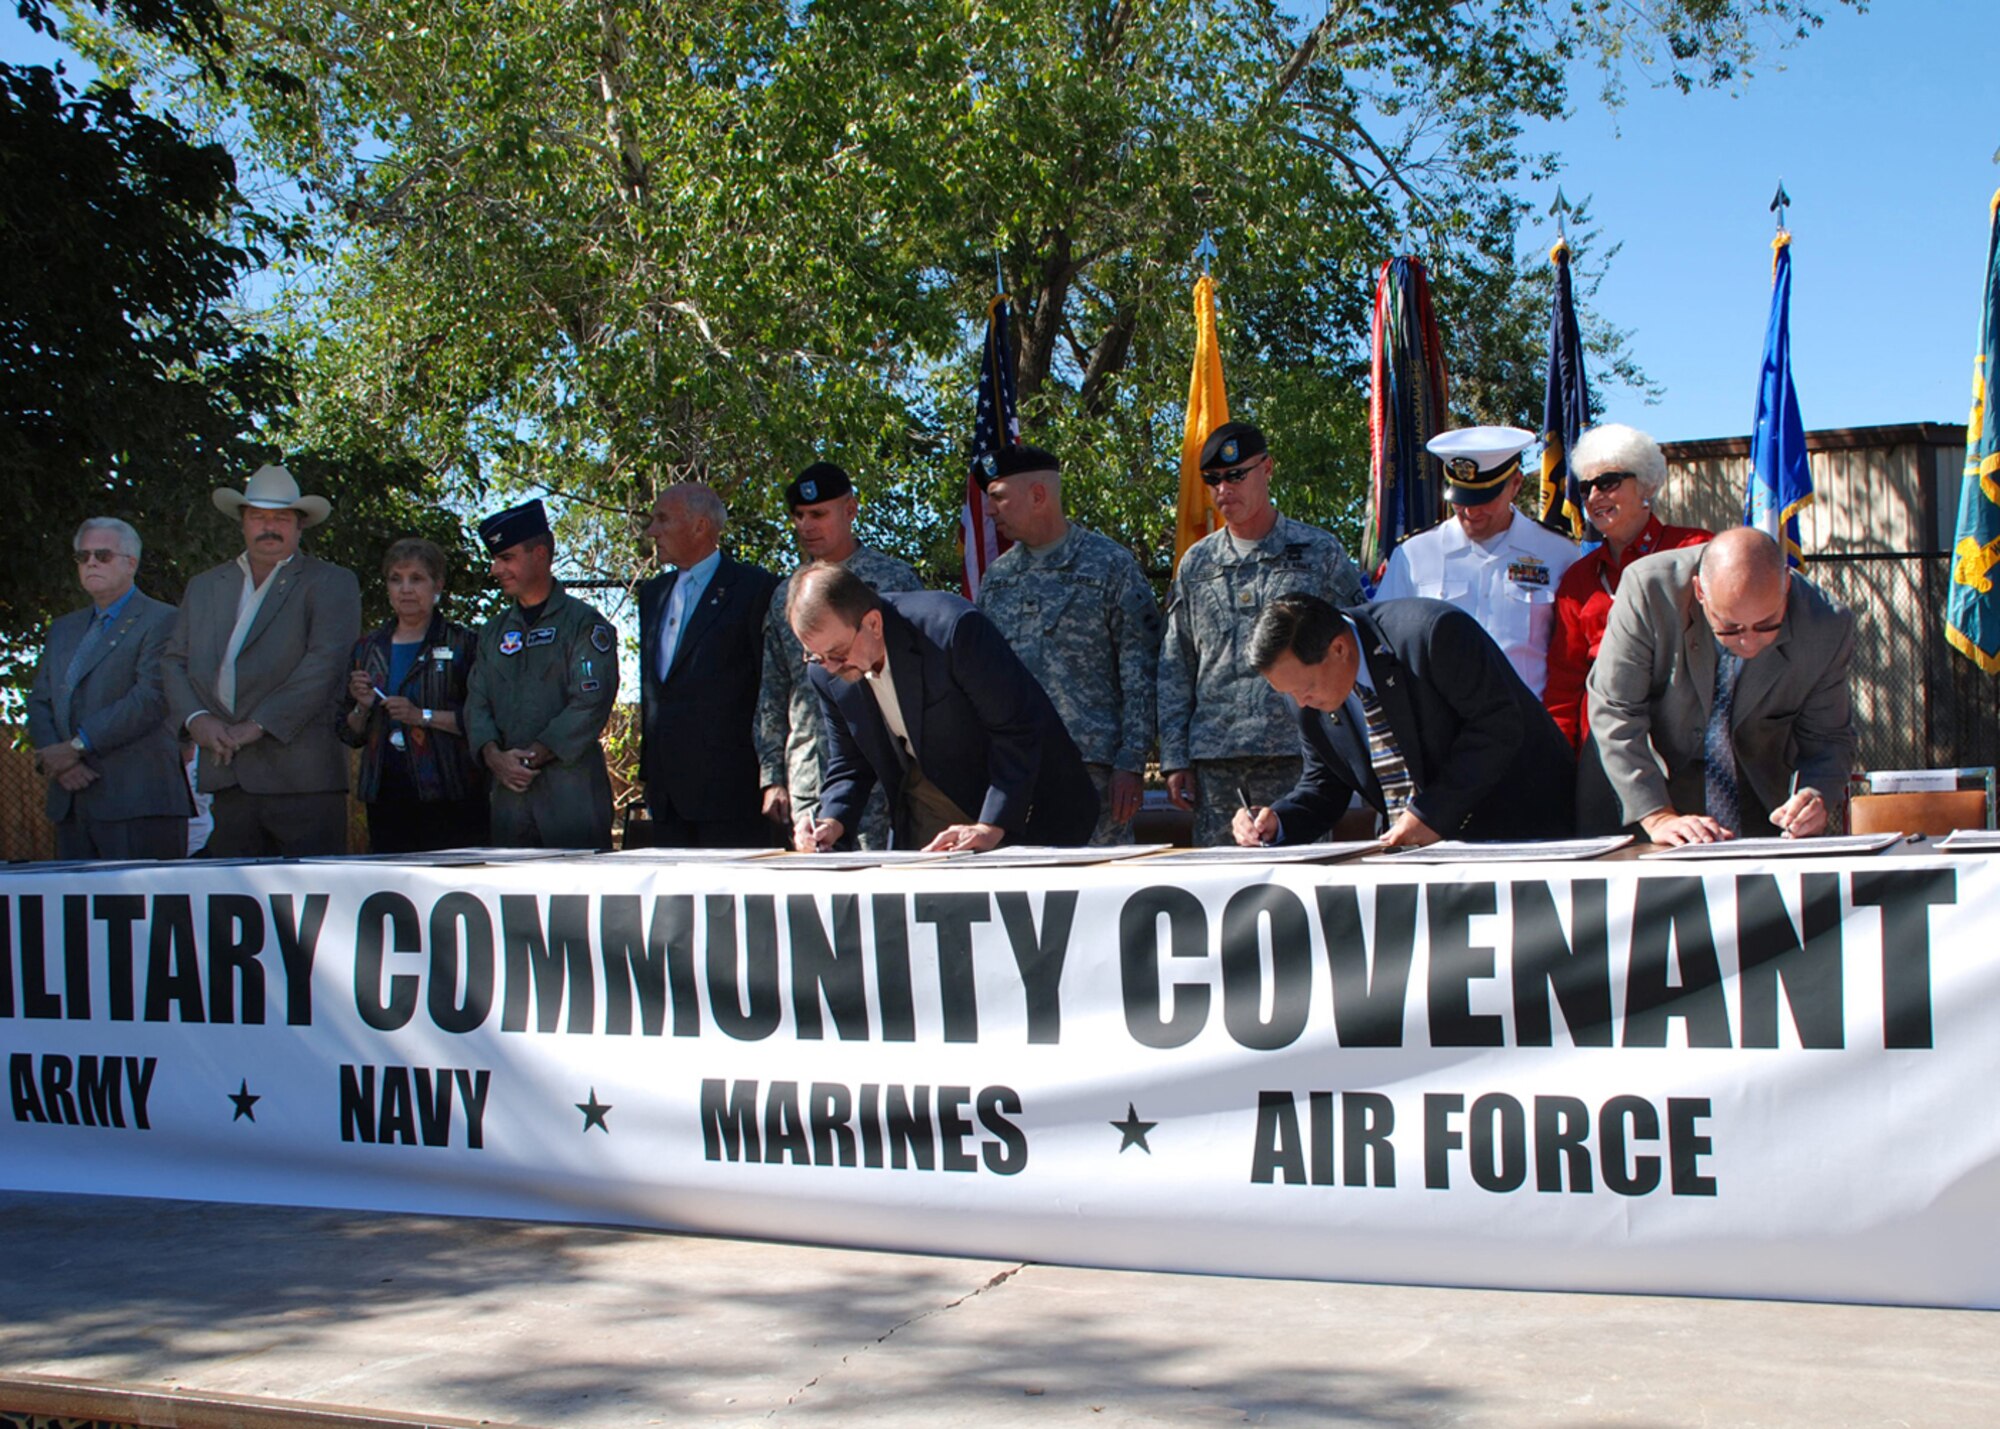 Representatives of Alamogordo, Las Cruces, Holloman Air Force Base, White Sands Missile Range, Ft. Bliss and the New Mexico National Guard sign several copies of the Army Community Covenant at the Alameda Zoo in Alamogordo, N.M. The ceremonial signing was a commitment to work together in support of military members and their families (White Sands Missile Range photo by Tom Fuller)